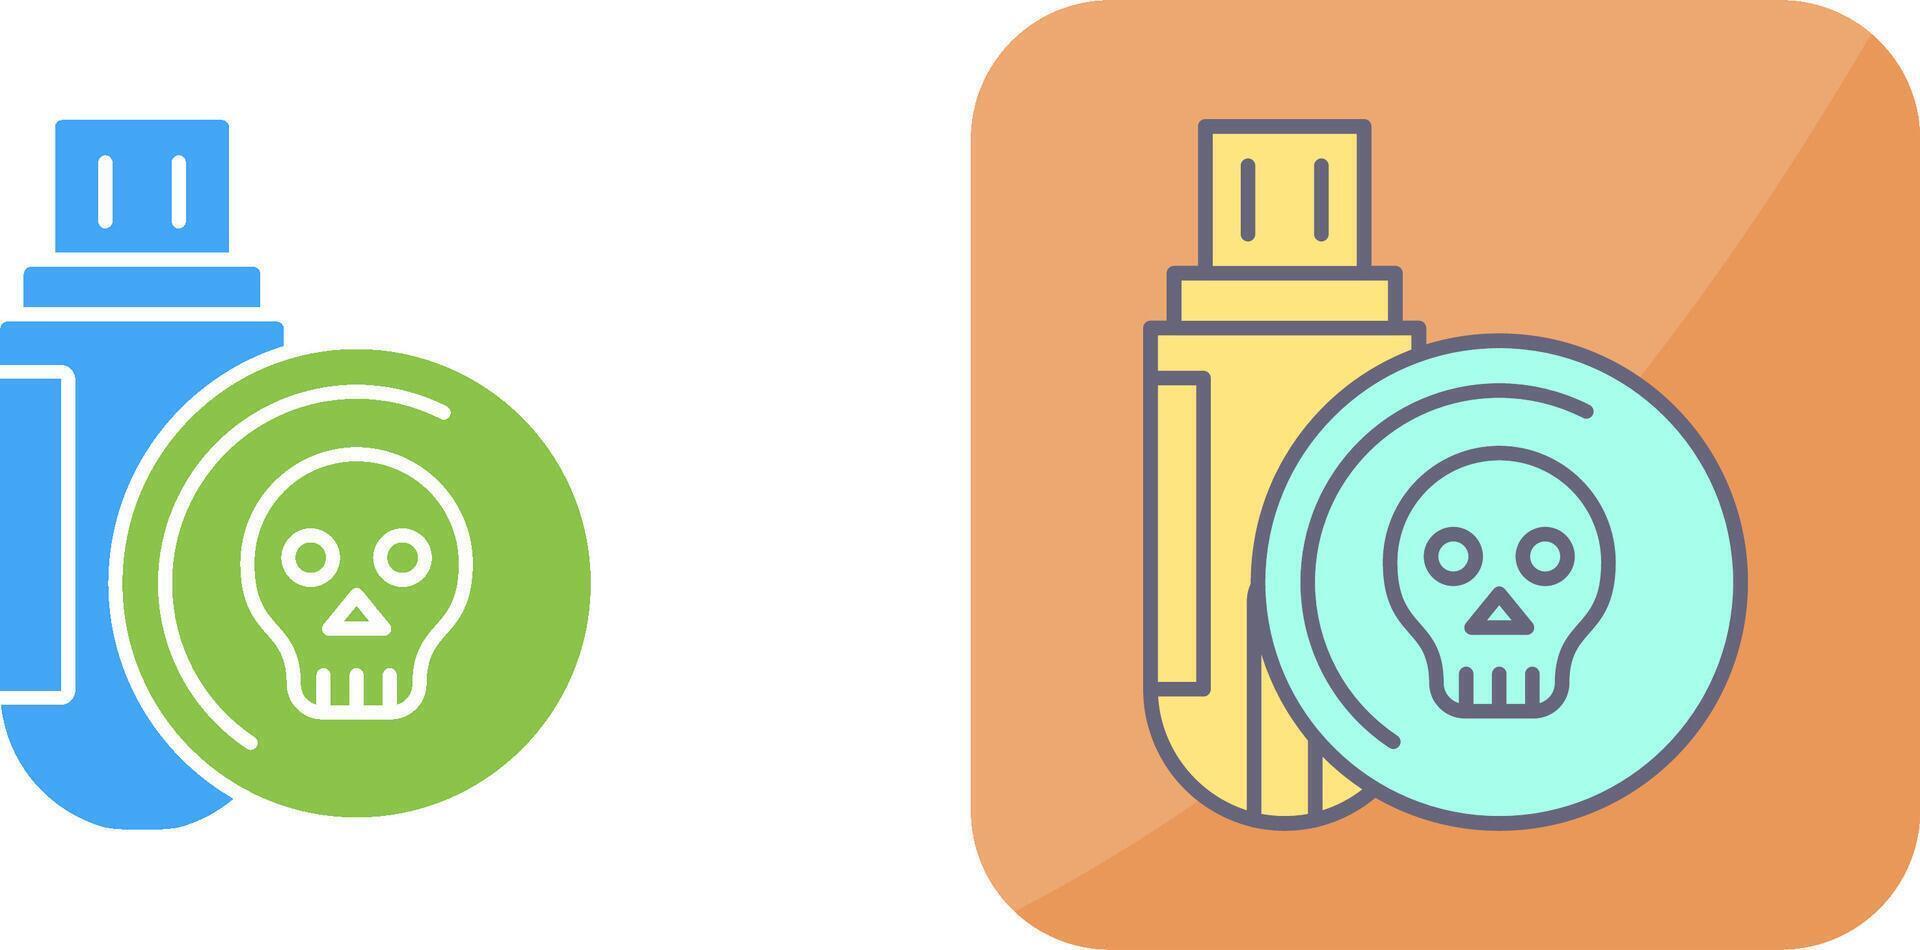 Infected Usb Drive Icon Design vector